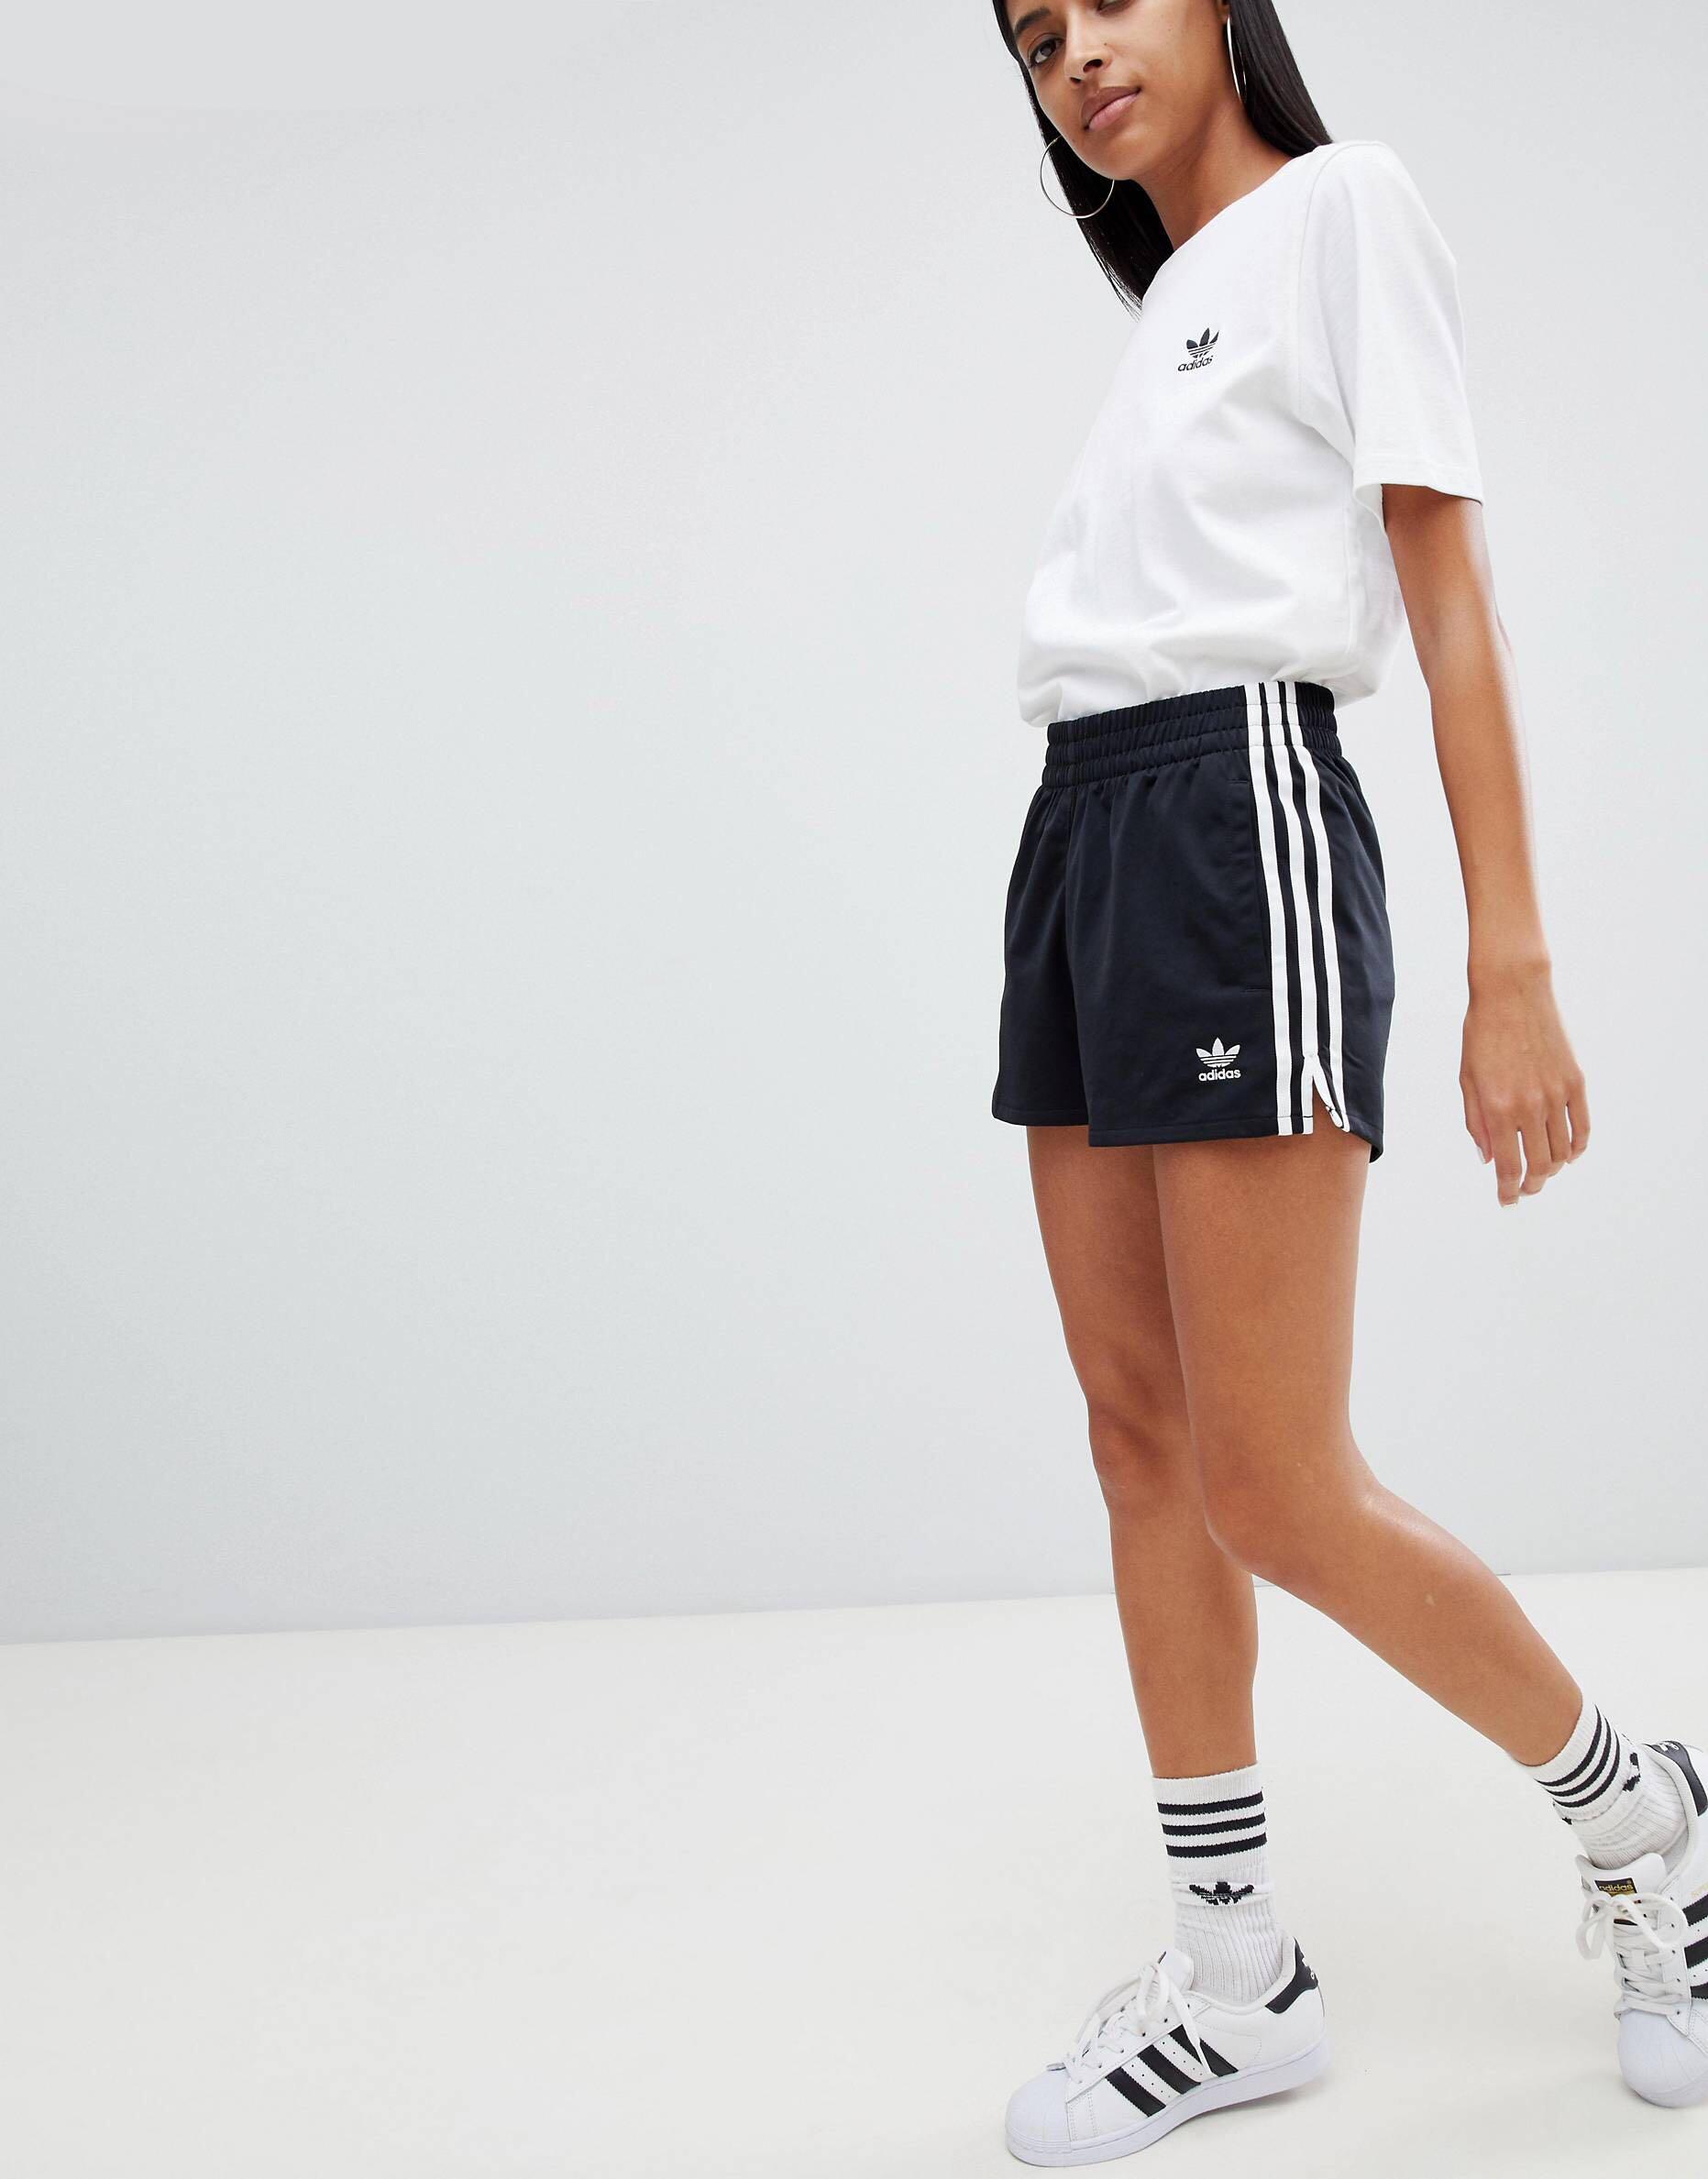 Adidas Originals 3 Striped Shorts, Women's Fashion, Bottoms, Other Bottoms Carousell